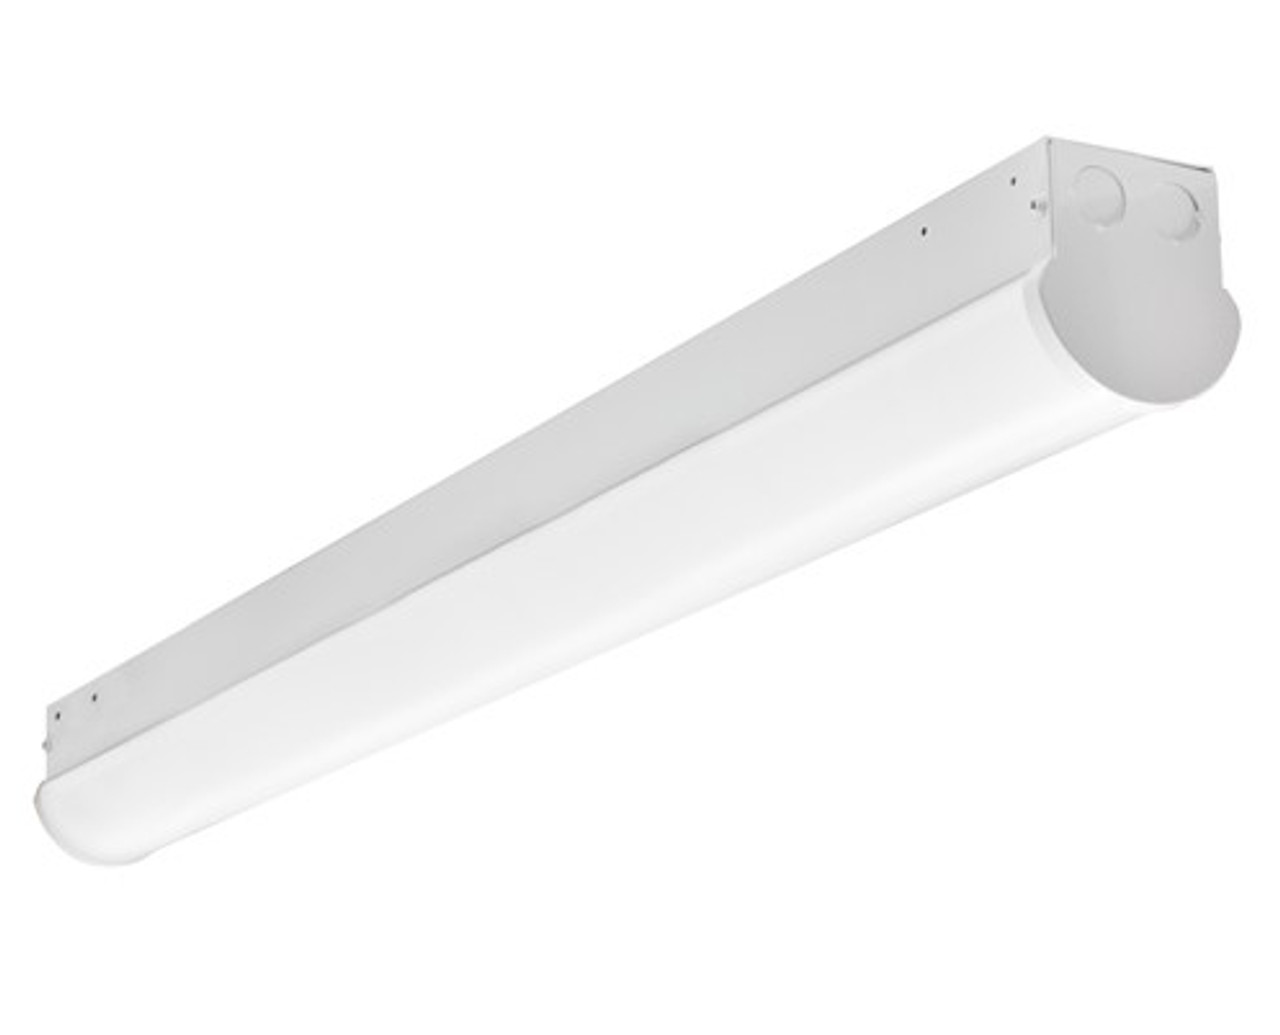 The BLCSLED series is a group of 2’, 3', 4’, and 8’ covered strip lights, which are designed as direct replacements for fluorescent strips. The BLCSLED series is designed to deliver general ambient lighting in a variety of indoor settings, including schools, offices, hospitals and stores, and is the perfect choice for both new construction and retrofits. This high-efficacy luminaire provides long-life and uniform illumination, as well as standard 0-10vdc dimming capability.
▪ Available in 3500k (warm/neutral white), 4000k (neutral white) and 5000k (cool white) color temperatures.*
▪ Long-life LEDs provide 122,000 hours of operation with at least 70% of initial lumen output (L70).**
▪ BLCSLED2FT provides 2,348 luminaire lumens (117 lumens per watt, LPW) at 3500k; 2,600 luminaire lumens (130 LPW) at 4000k; and 2,432 luminaire lumens (122 LPW) at 5000k.*
▪ BLCSLED3FT provides 3,129 luminaire lumens (125 LPW) at 3500k; 3,250 luminaire lumens (130 LPW) at 4000k; and 3,334 luminaire lumens (133 LPW) at 5000k.*
▪ BLCSLED4FT provides 3,811 luminaire lumens (119 LPW) at 3500k; 4,224 luminaire lumens (132 LPW) at 4000k; and 4,256 luminaire lumens (133 LPW) at 5000k.*
▪ BLCSLED8FT provides 8,450 luminaire lumens (130 LPW) at 3500k; 8,580 luminaire lumens (132 LPW) at 4000k; and 8,645 luminaire lumens (133 LPW) at 5000k.*
▪ Uniform illumination with no visible LED pixelation.
▪ Universal 120-277 AC voltage (50-60Hz) is standard.
▪ 0-10vdc dimming capability is standard.
▪ Power factor > 0.90.
▪ Total harmonic distortion < 20%.
▪ Color rendering index > 80.
▪ Steel housing and PMMA lens.
▪ Easy installation in new construction or retrofit.